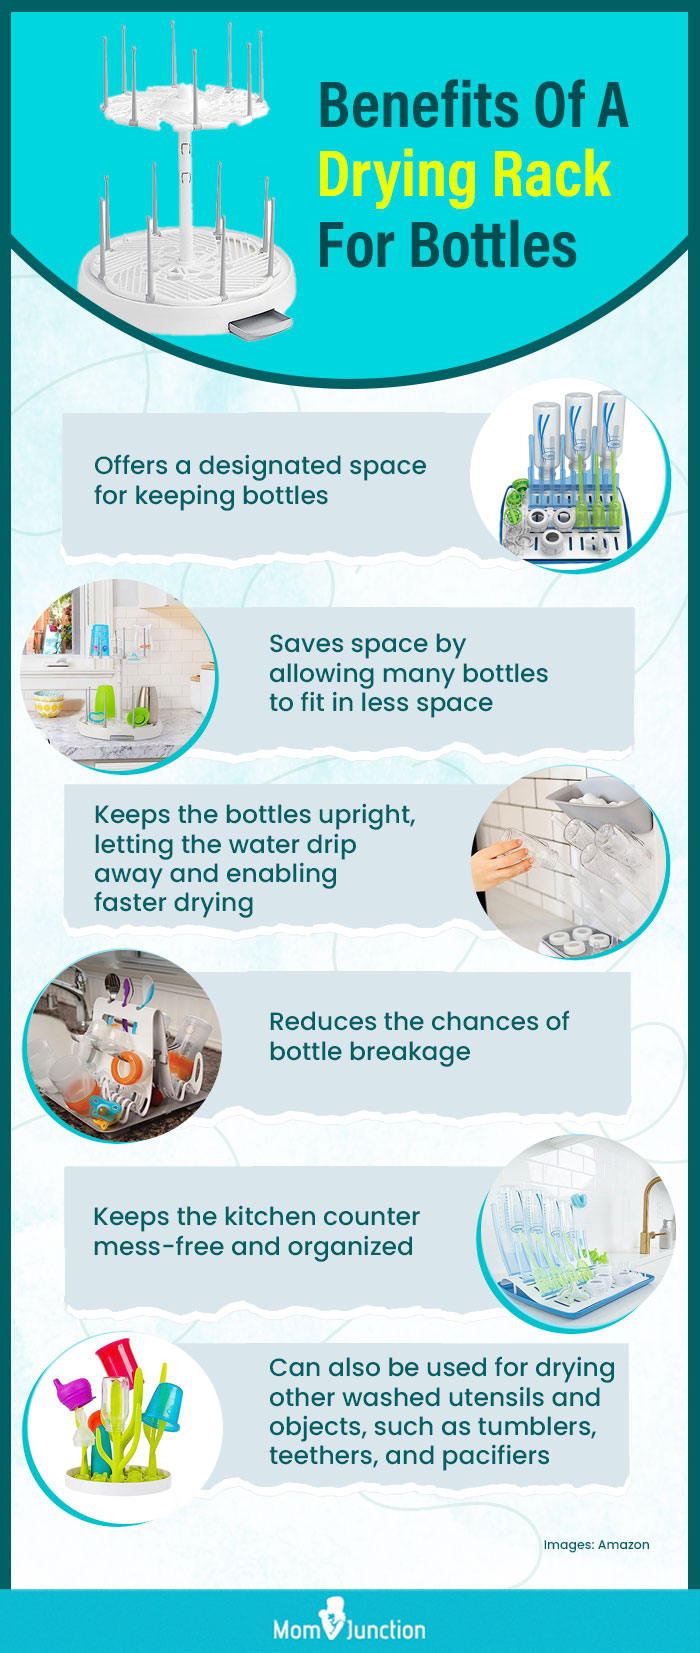 Benefits Of A Drying Rack For Bottles (infographic)